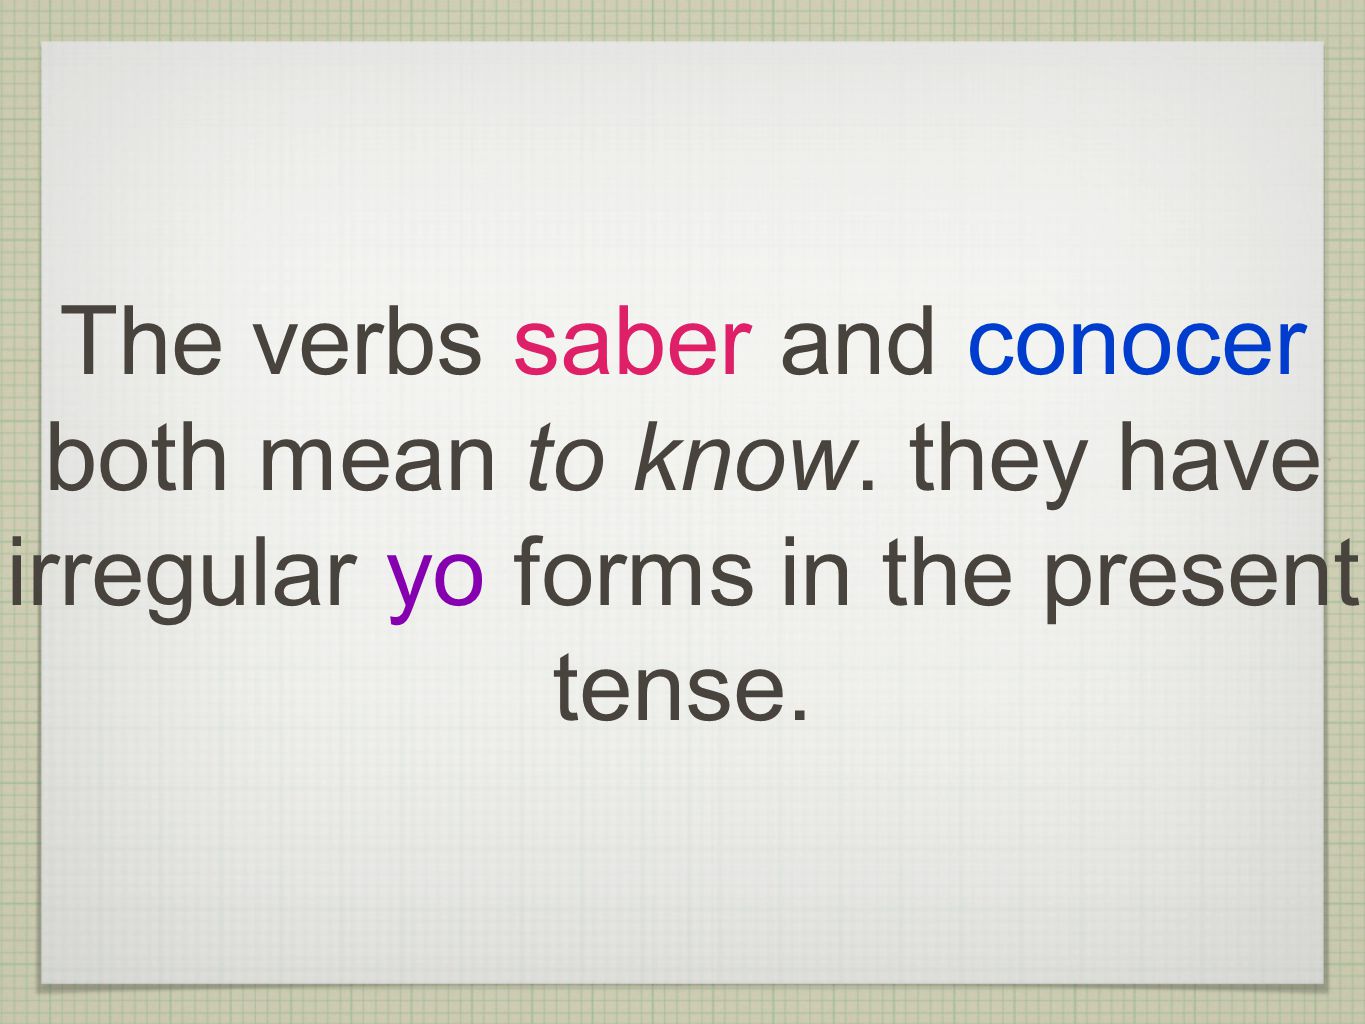 The verbs saber and conocer both mean to know